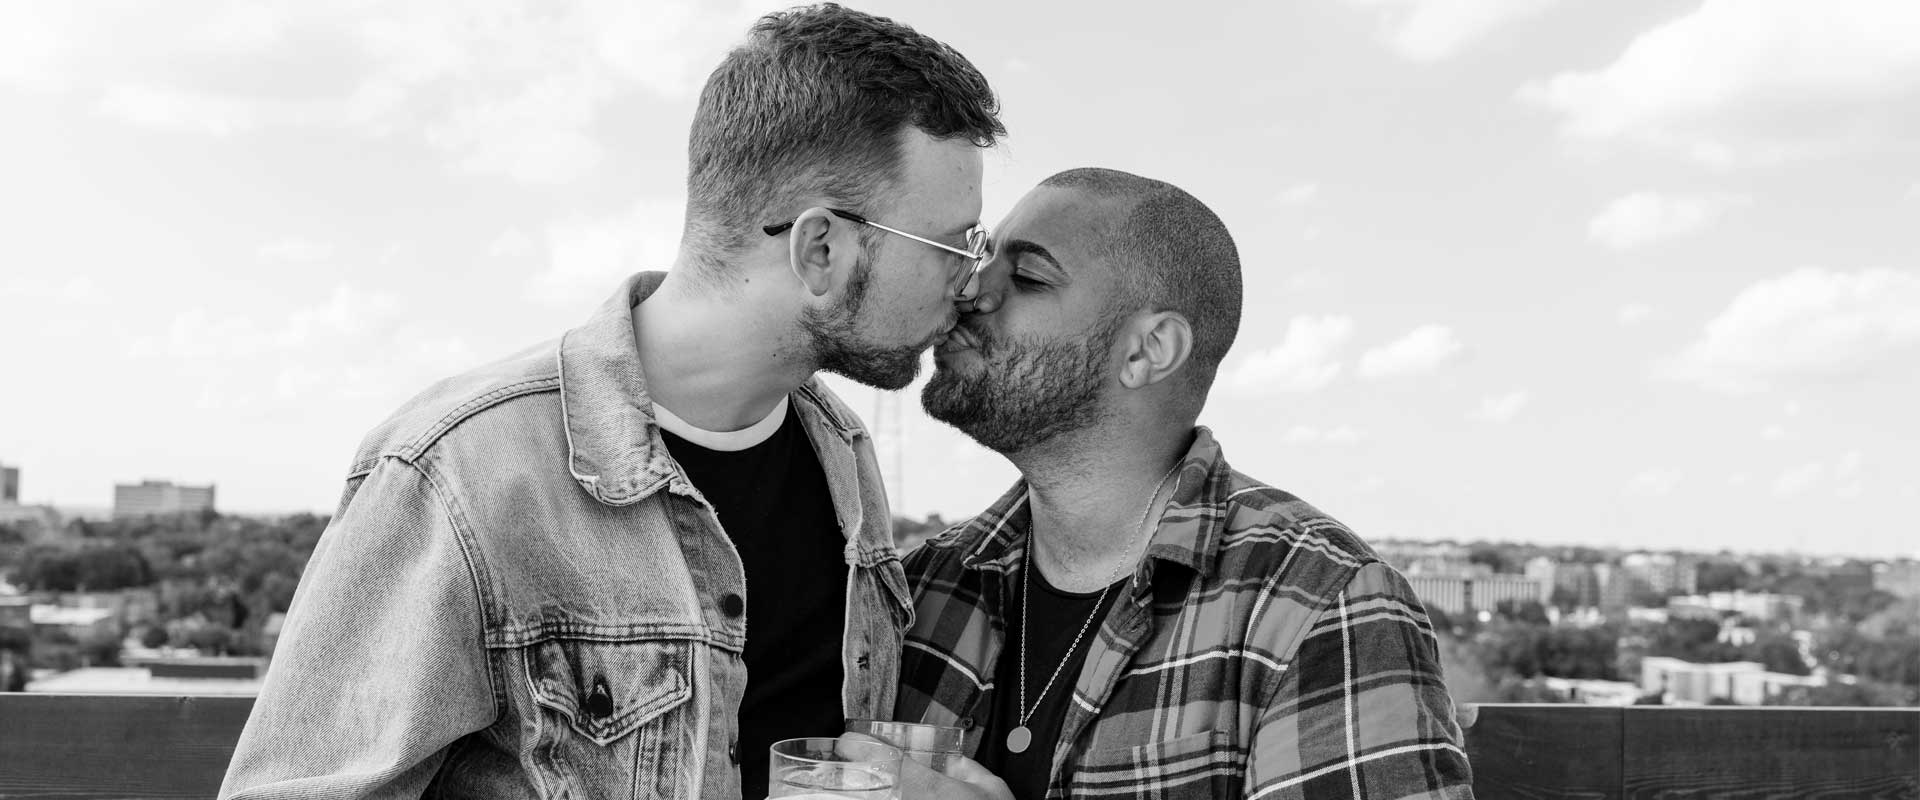 Two gay boys kissing each other in front of a view of a landscape decriminalize homosexuality